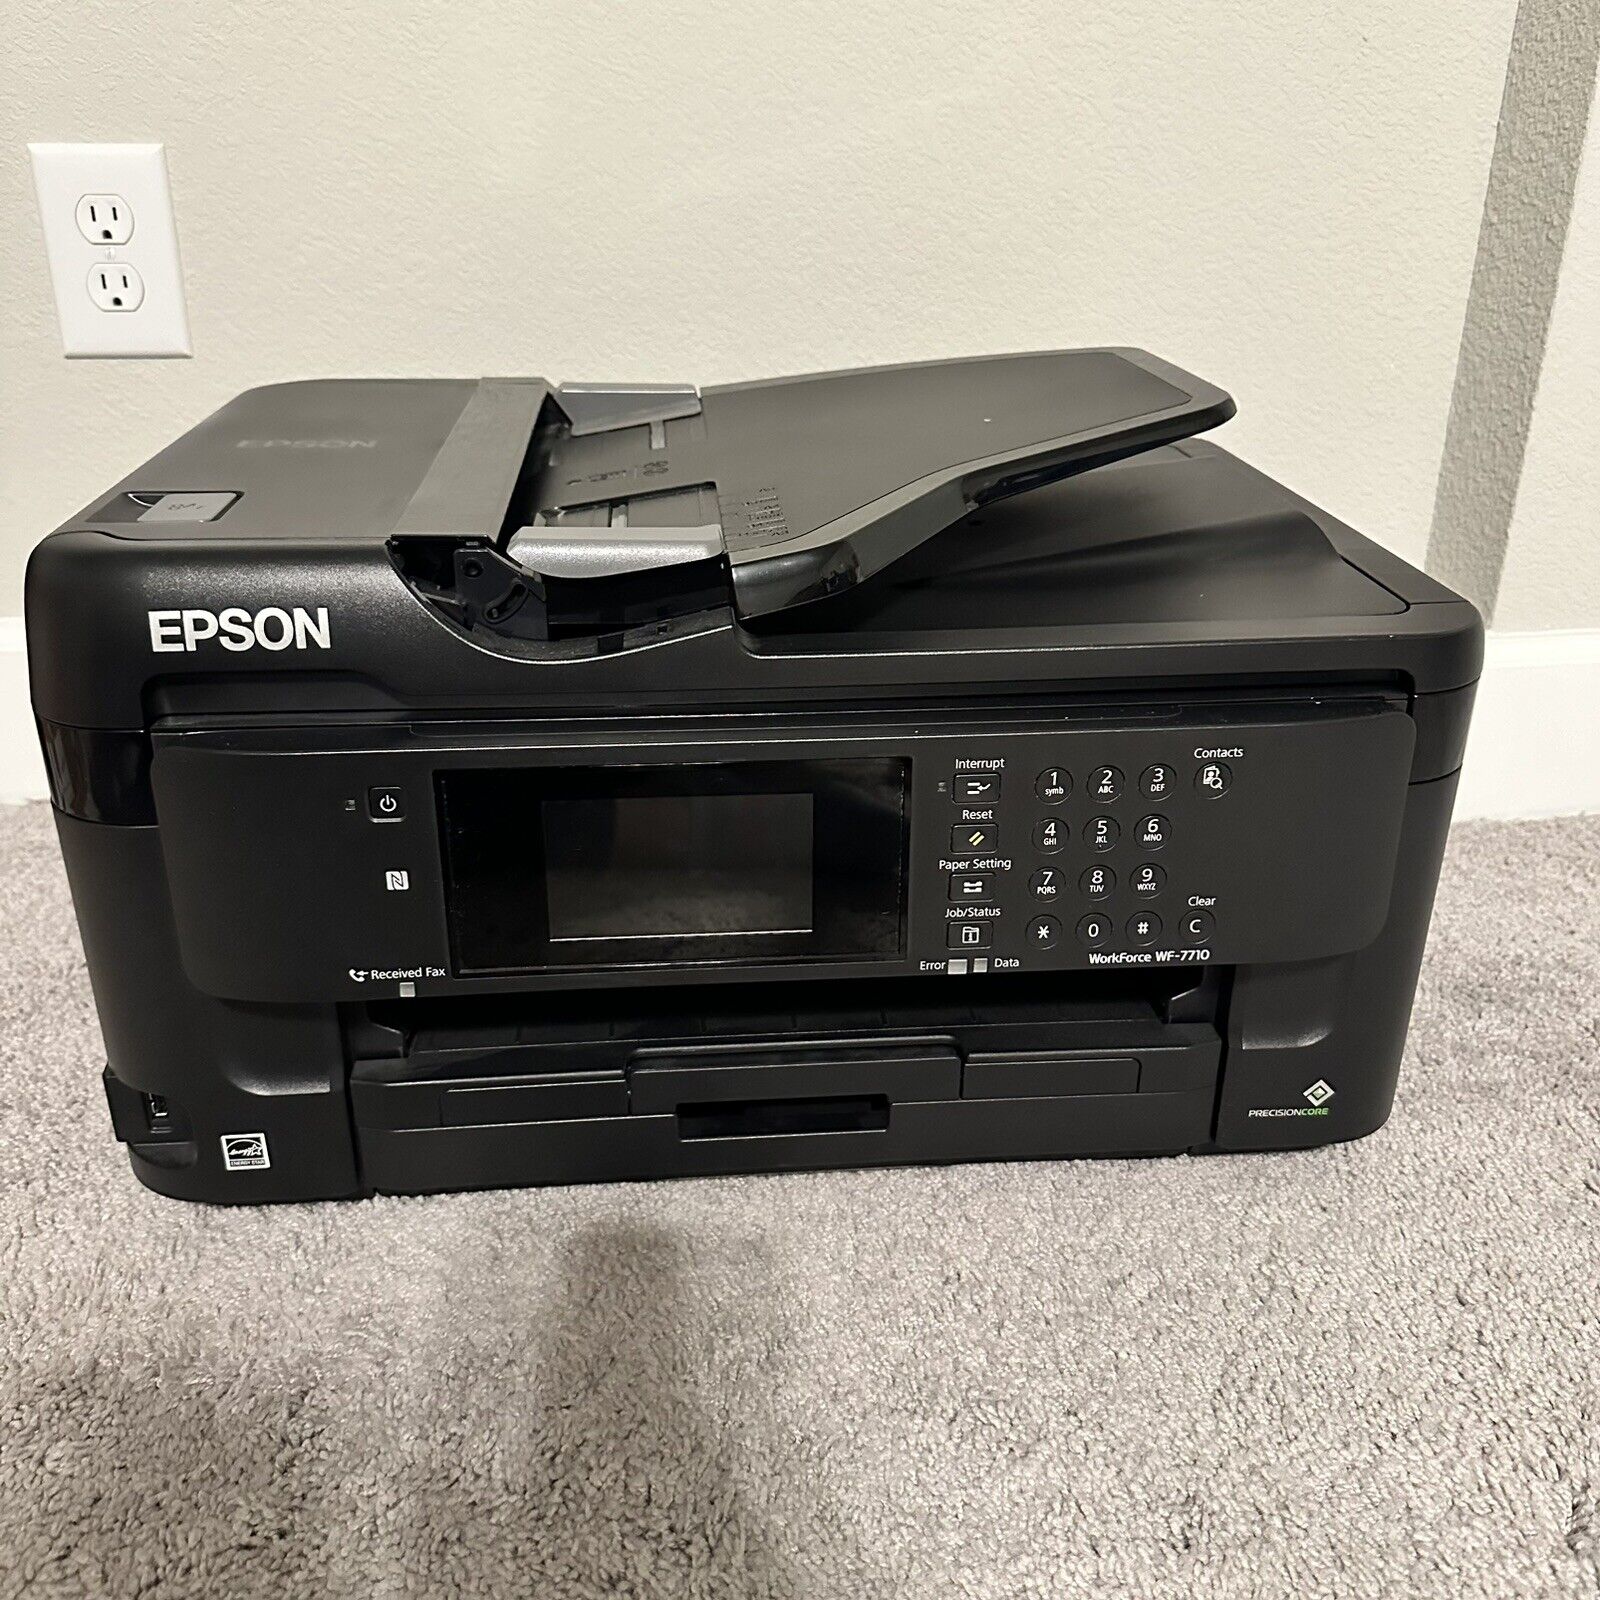 Epson WorkForce WF-7710 All-in-One Inkjet Printer TESTED - Low Page Count No Ink